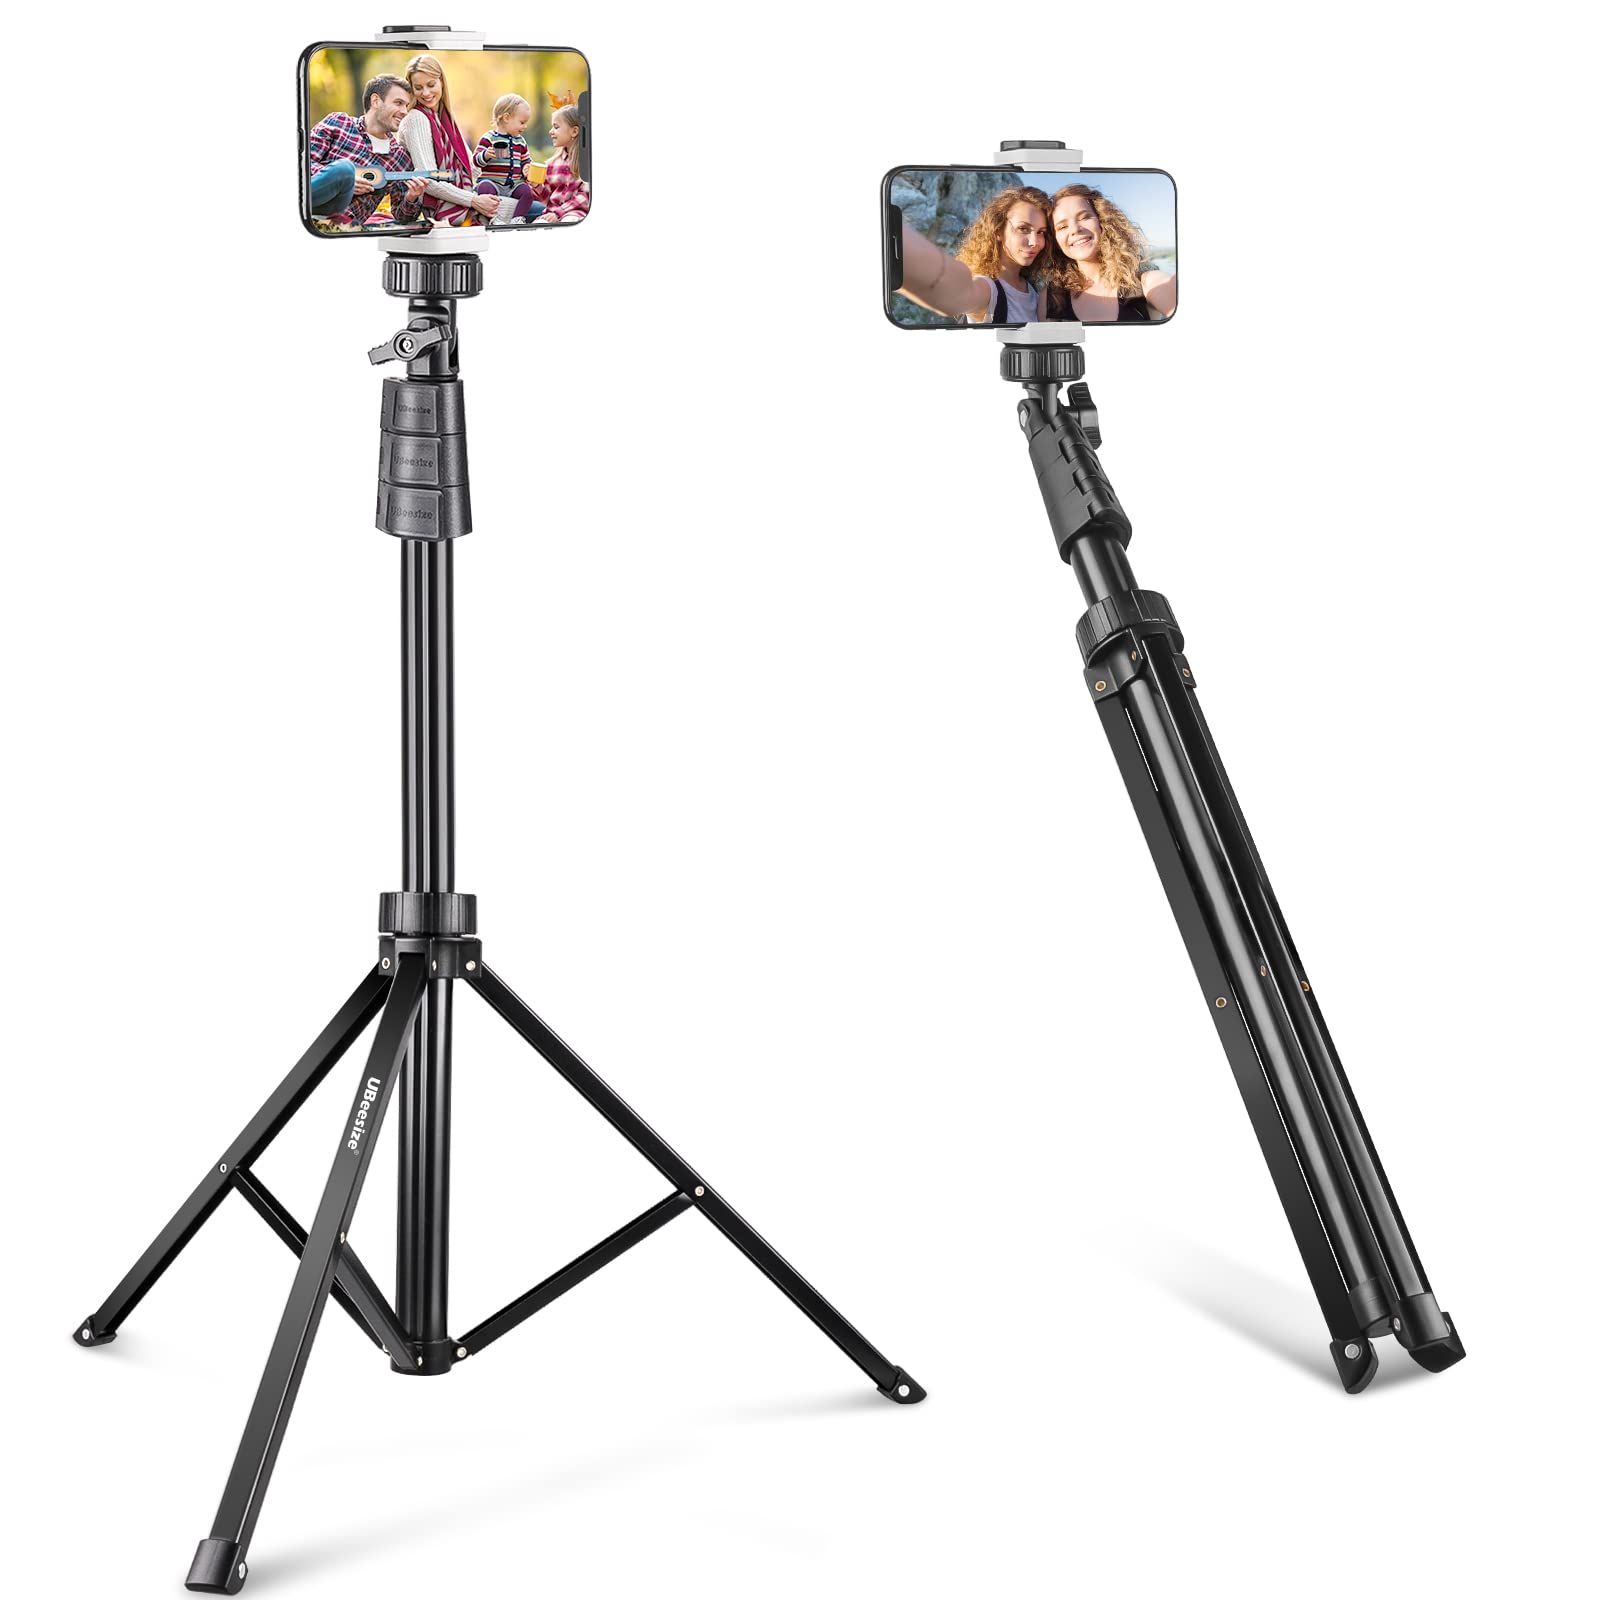 UBeesize 67'' Phone Tripod Stand & Selfie Stick Tripod, All in One Professional Cell Phone Tripod, Cellphone Tripod with Wireless Remote and Phone Holder, Compatible with All Phones/Cameras